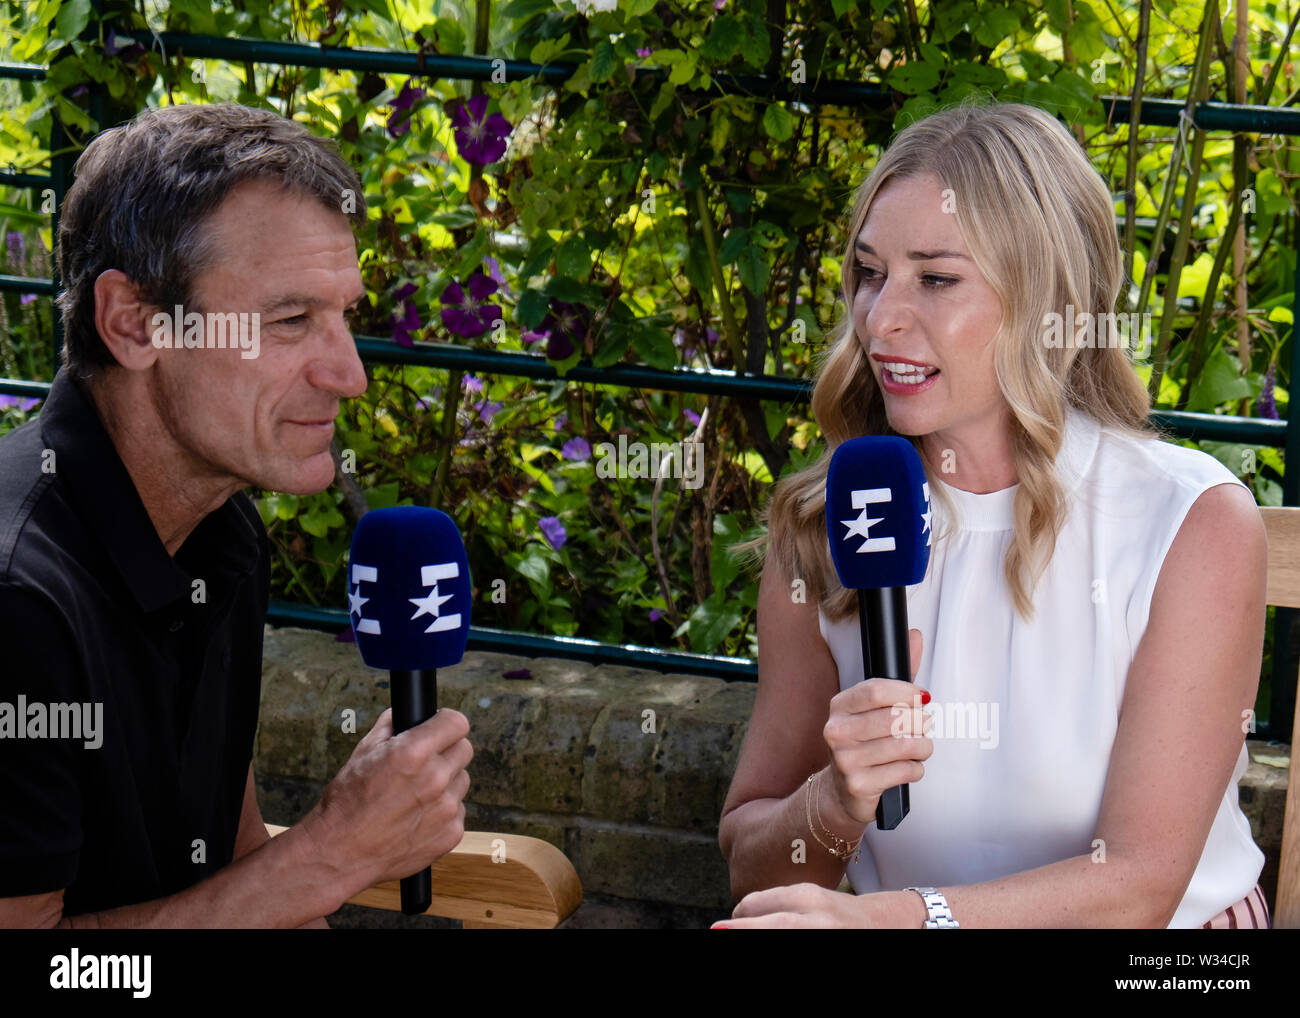 London, UK. 12th July, 2019. Mats Wilander (l) and Barbara Schett talk in  front of the camera for TV channel Eurosport at day 11 at the Wimbledon  Tennis Championships 2019 at the